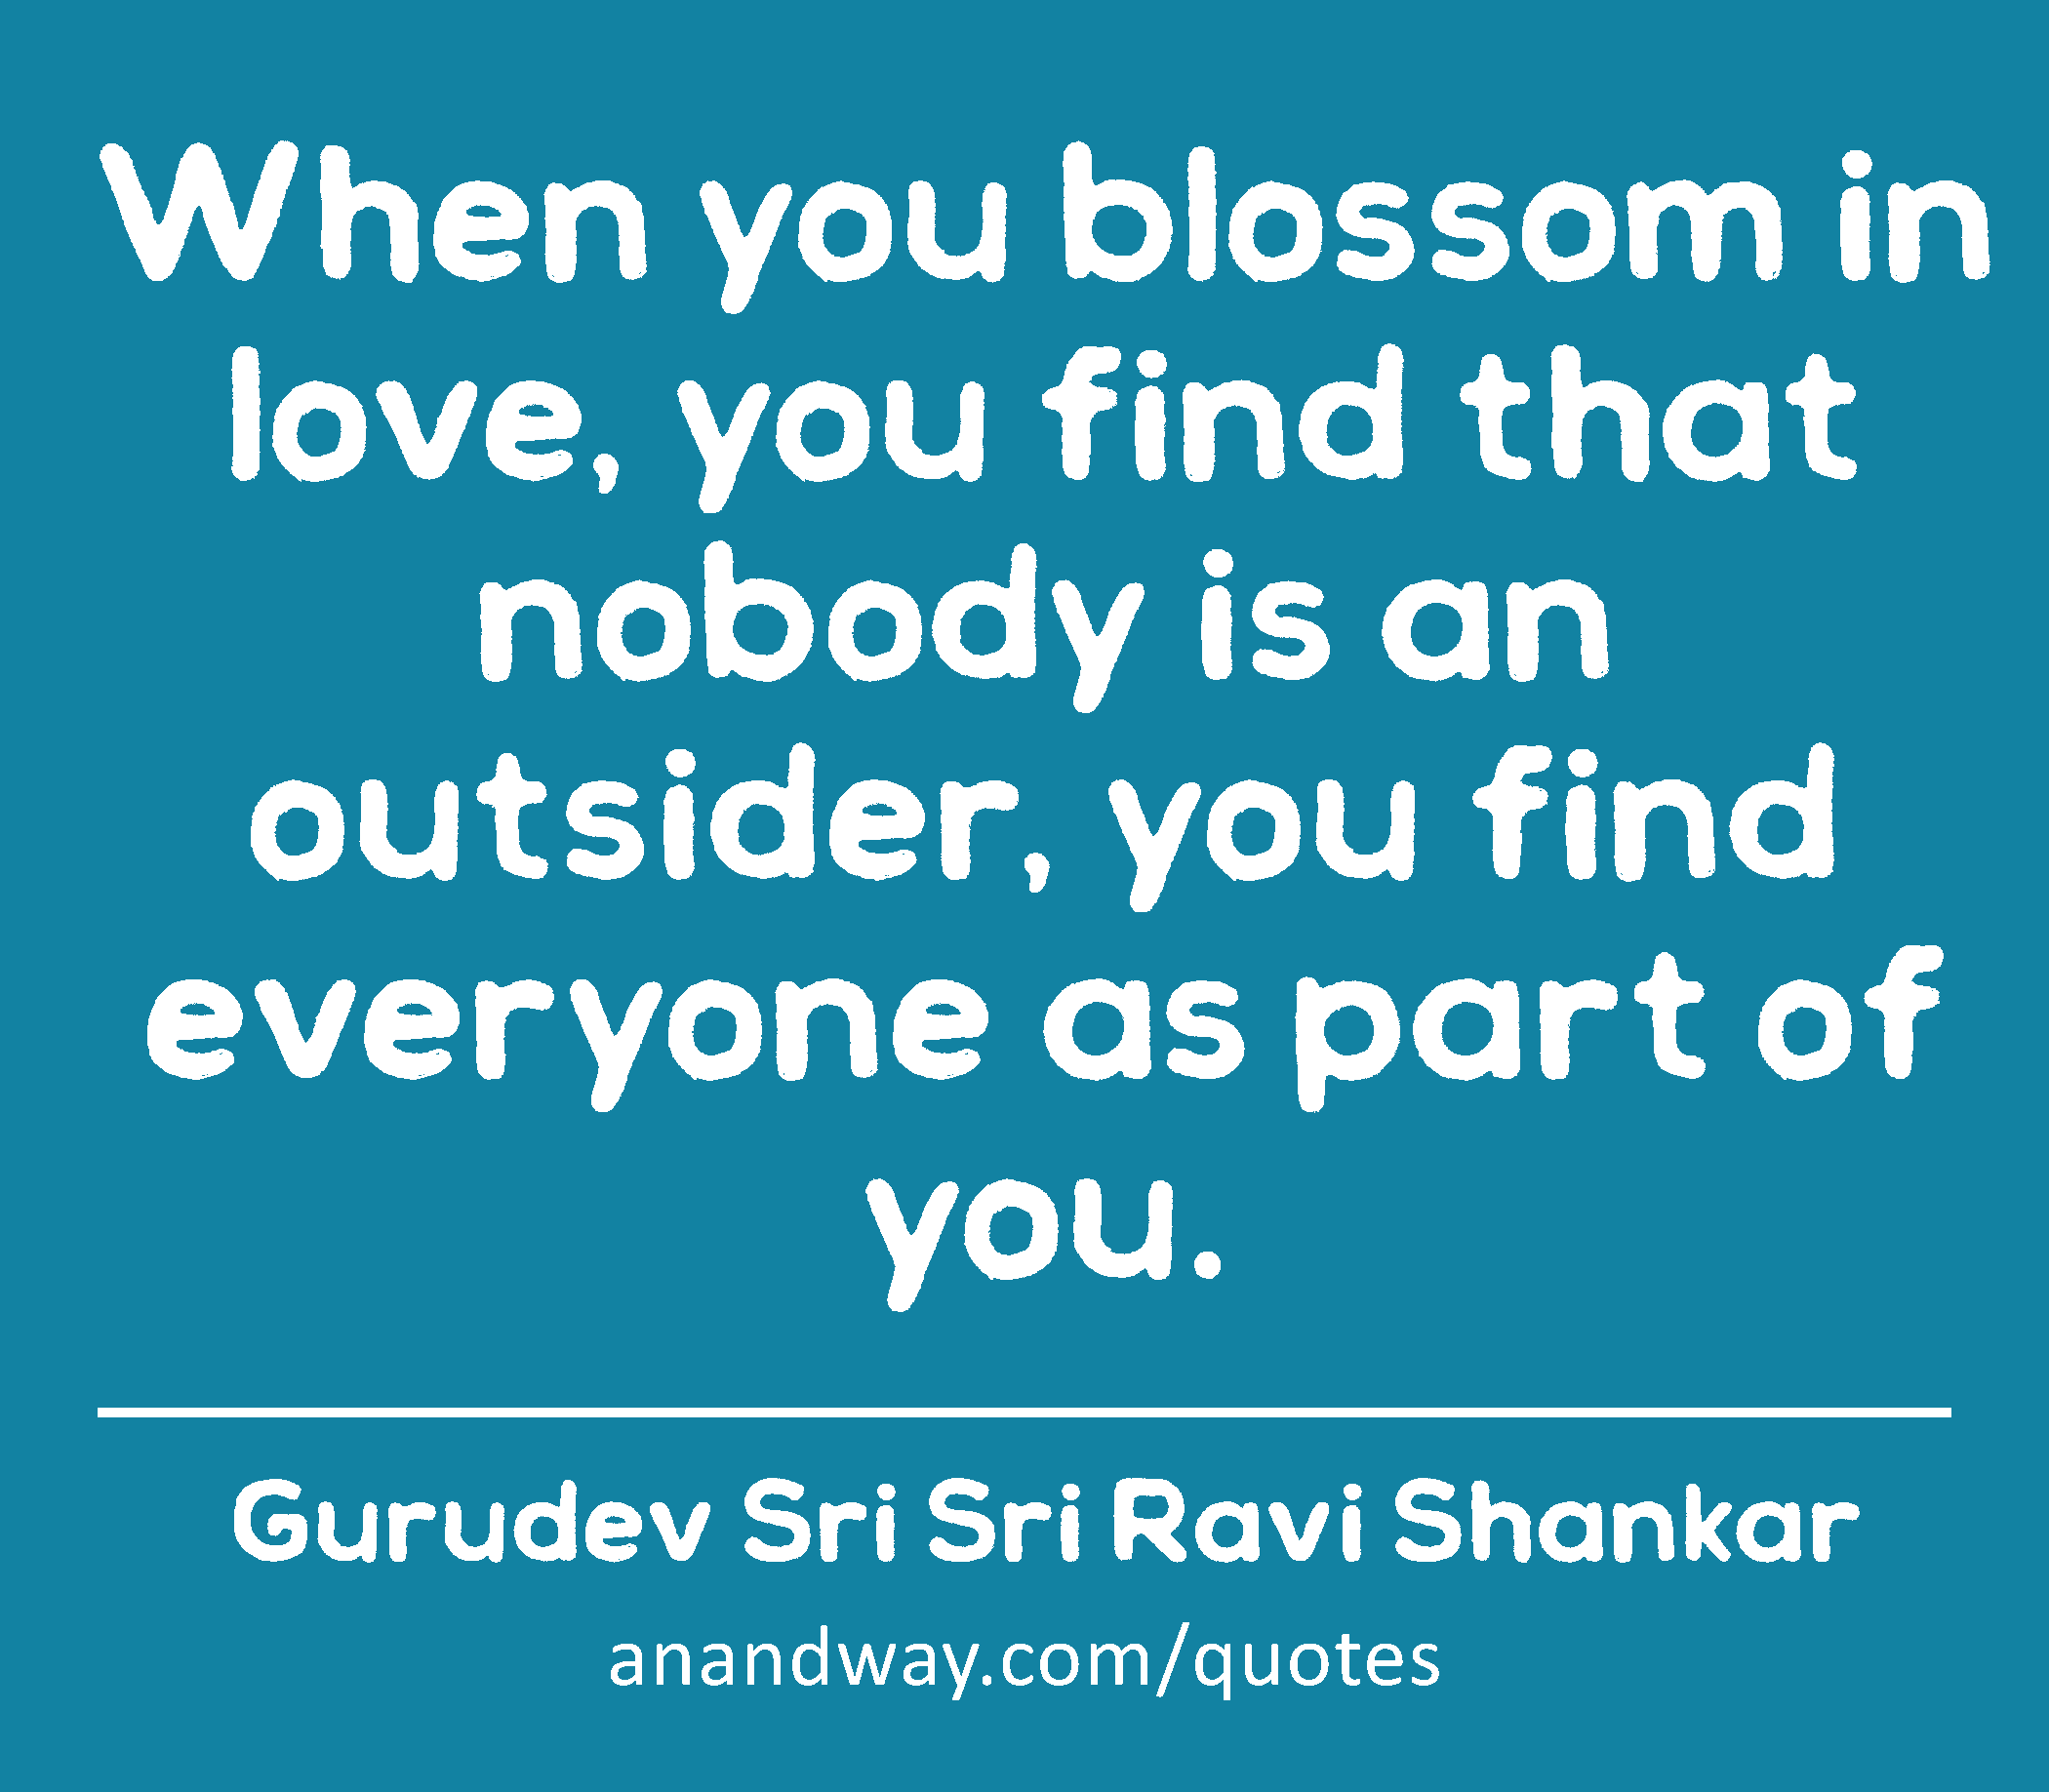 When you blossom in love, you find that nobody is an outsider, you find everyone as part of you. 
 -Gurudev Sri Sri Ravi Shankar